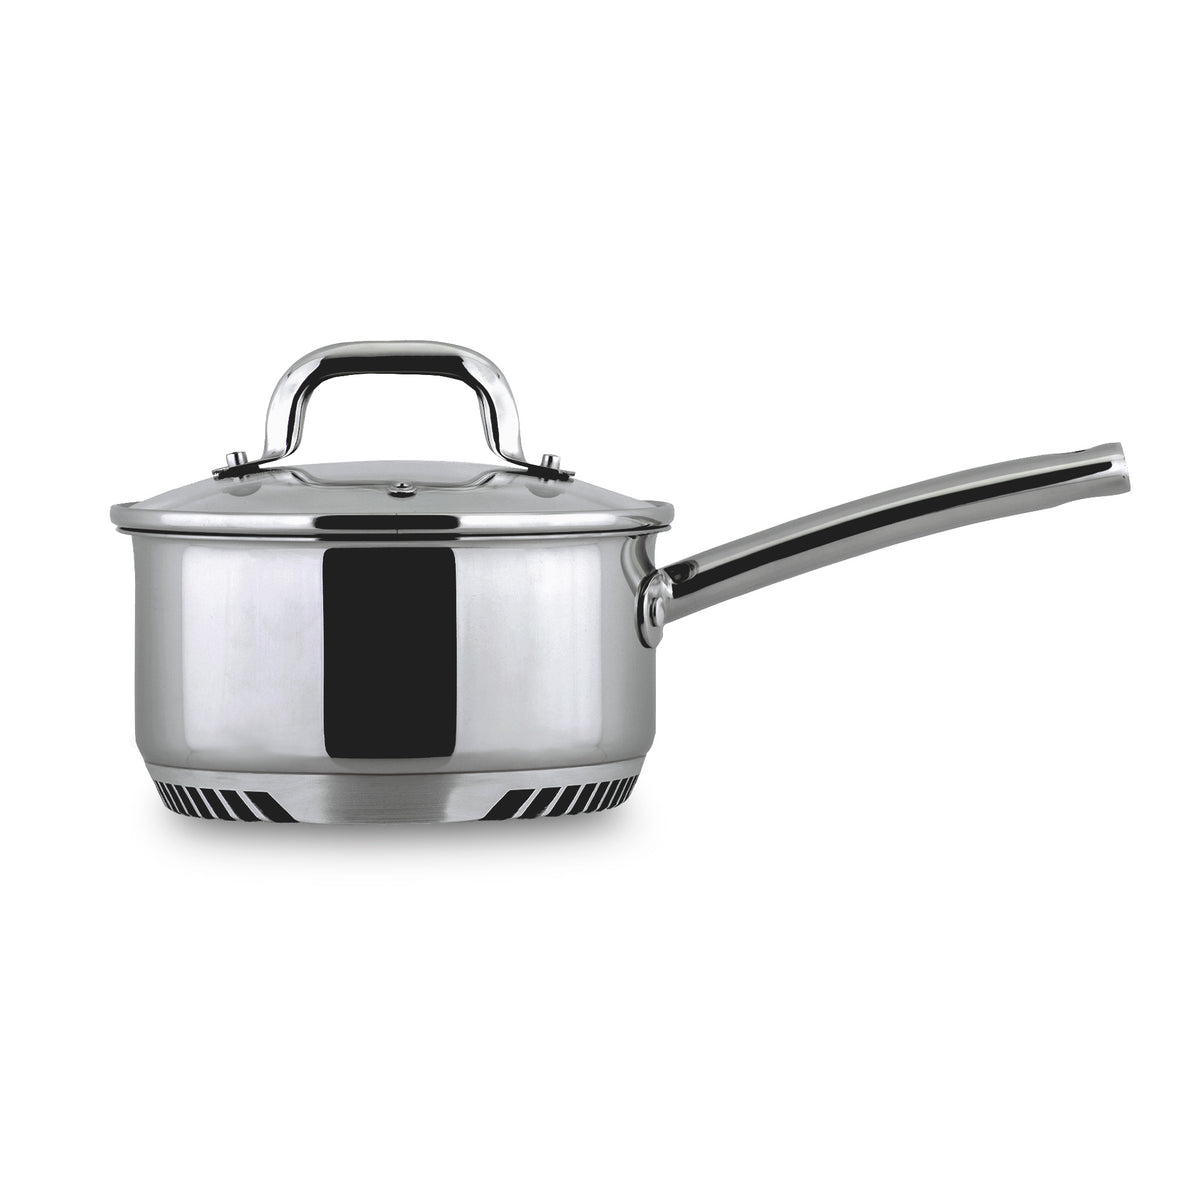 FRESHAIR™ RAPID BOIL 2.5 QT. STAINLESS STEEL TEA KETTLE, TIME-AND-ENERGY  SAVING COOKWARE FOR GAS STOVE